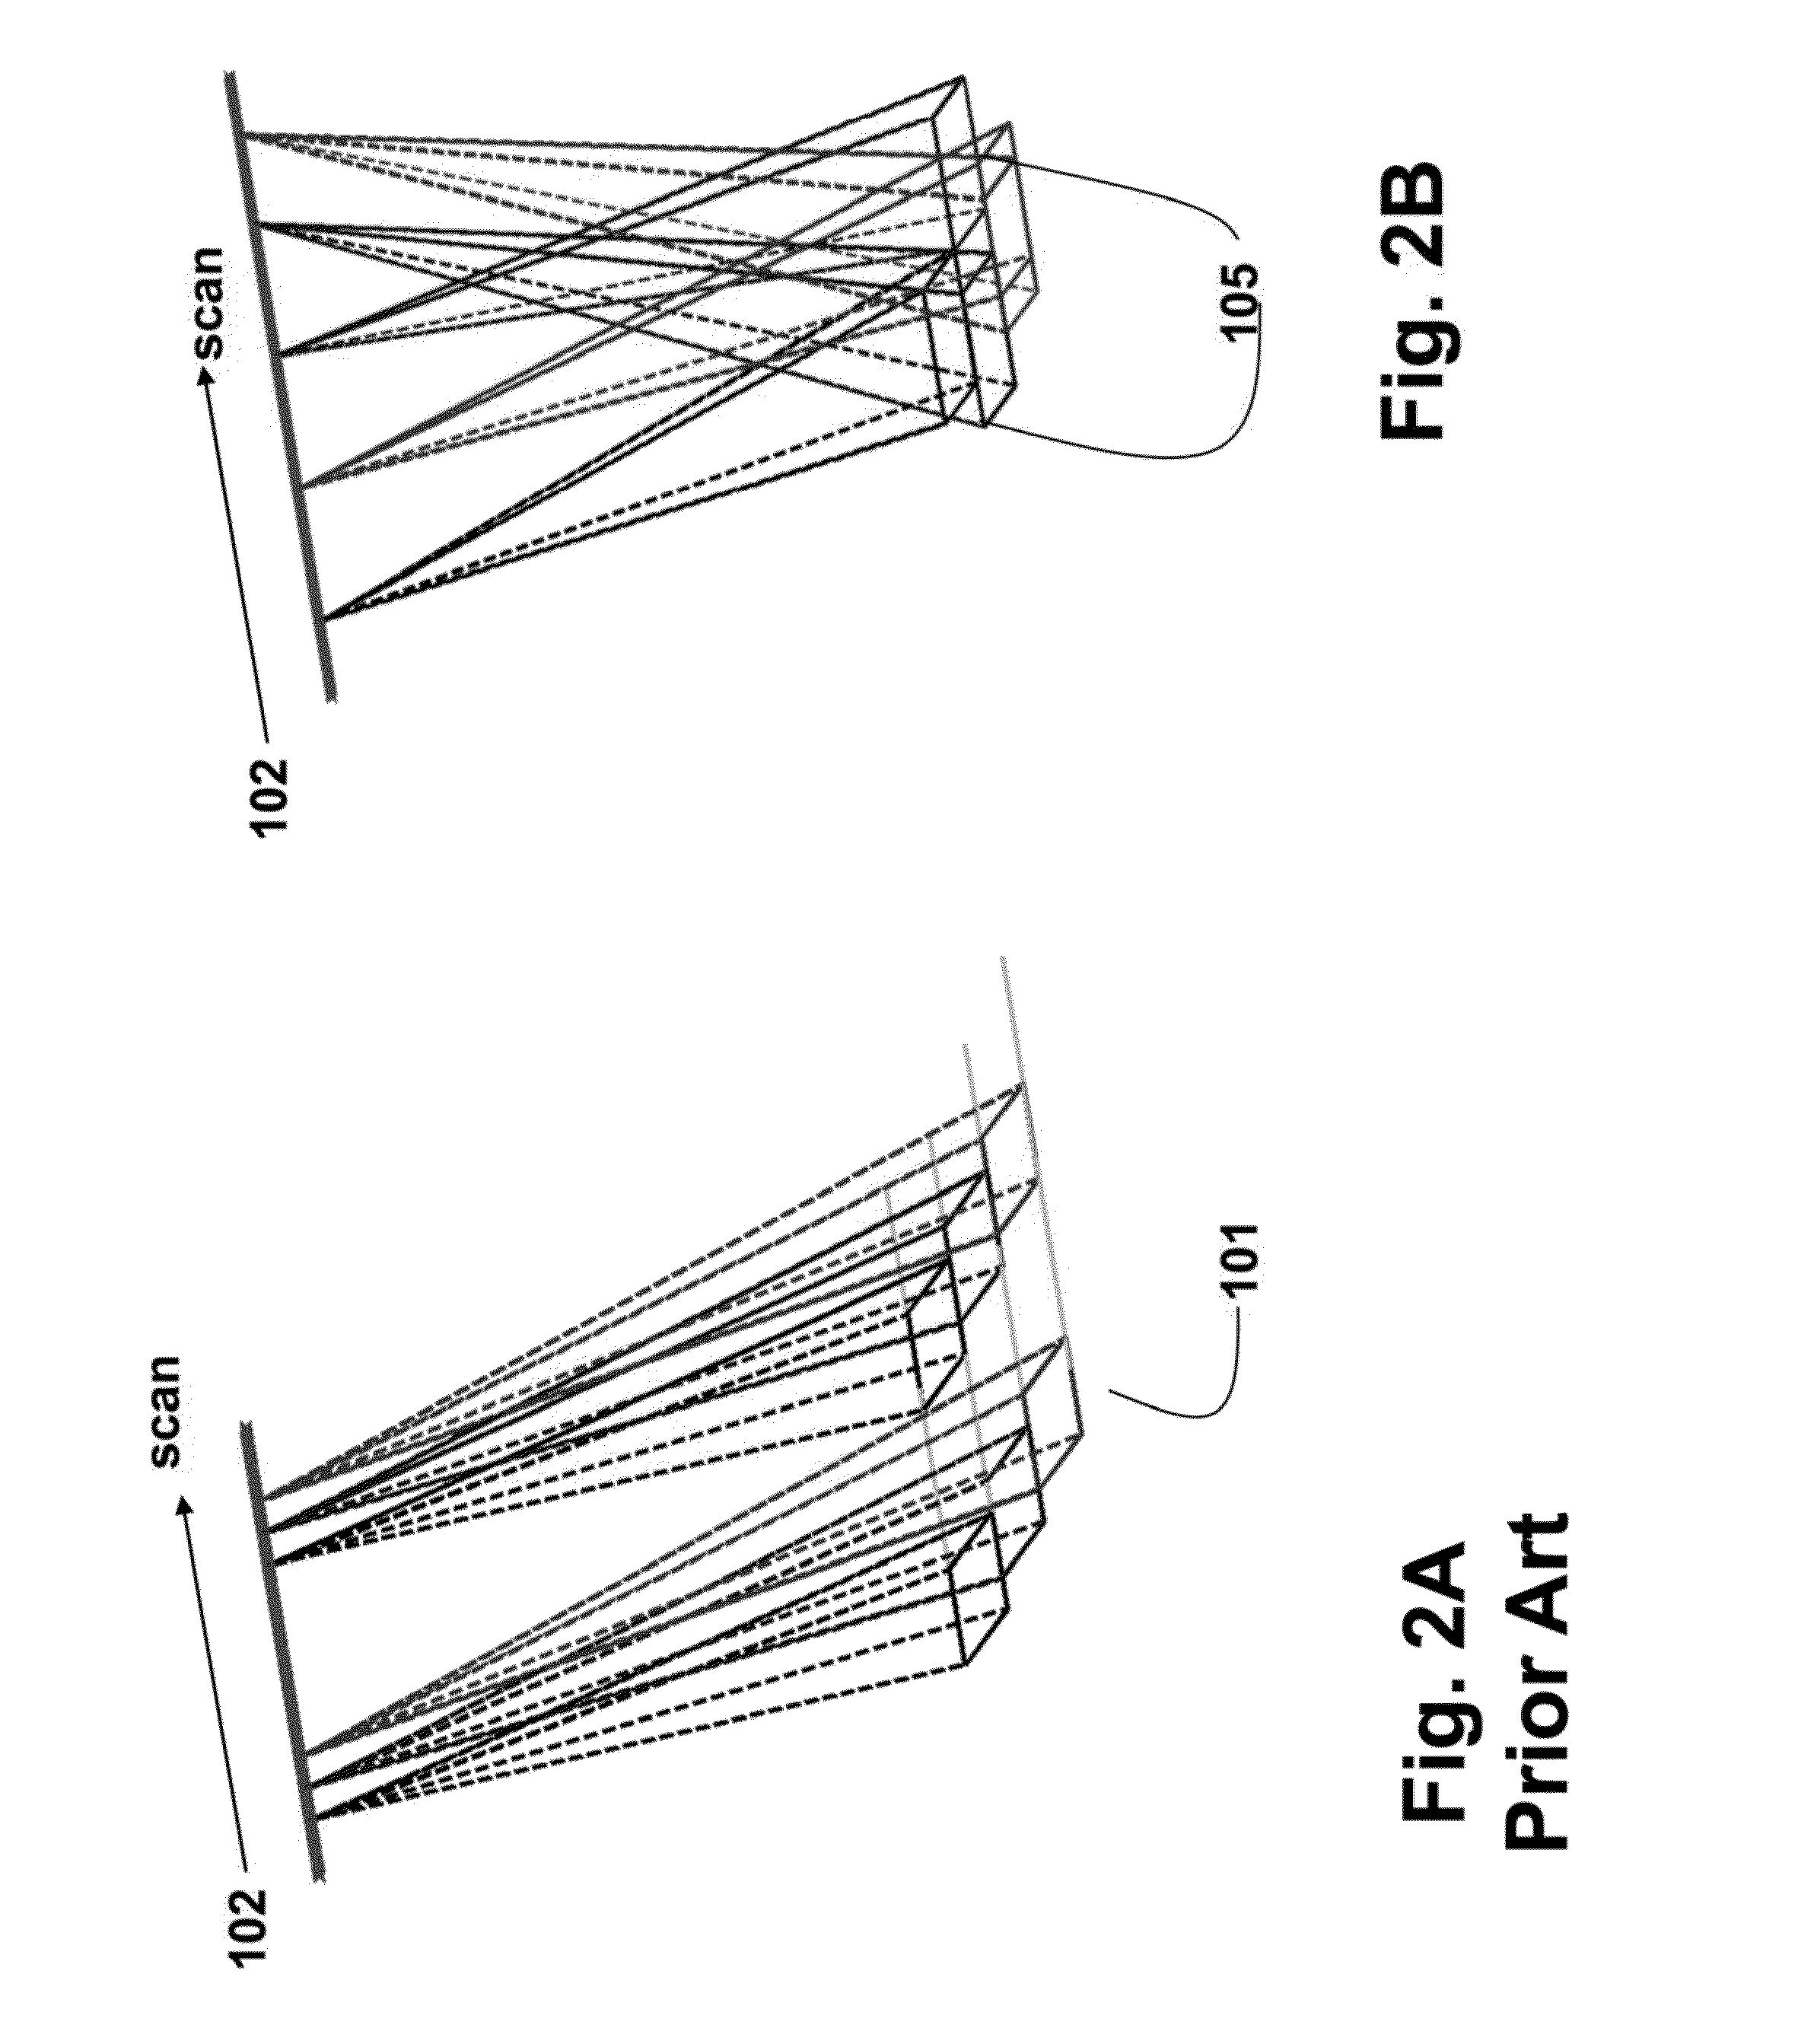 Method and System for Random Steerable Sar Using Compressive Sensing